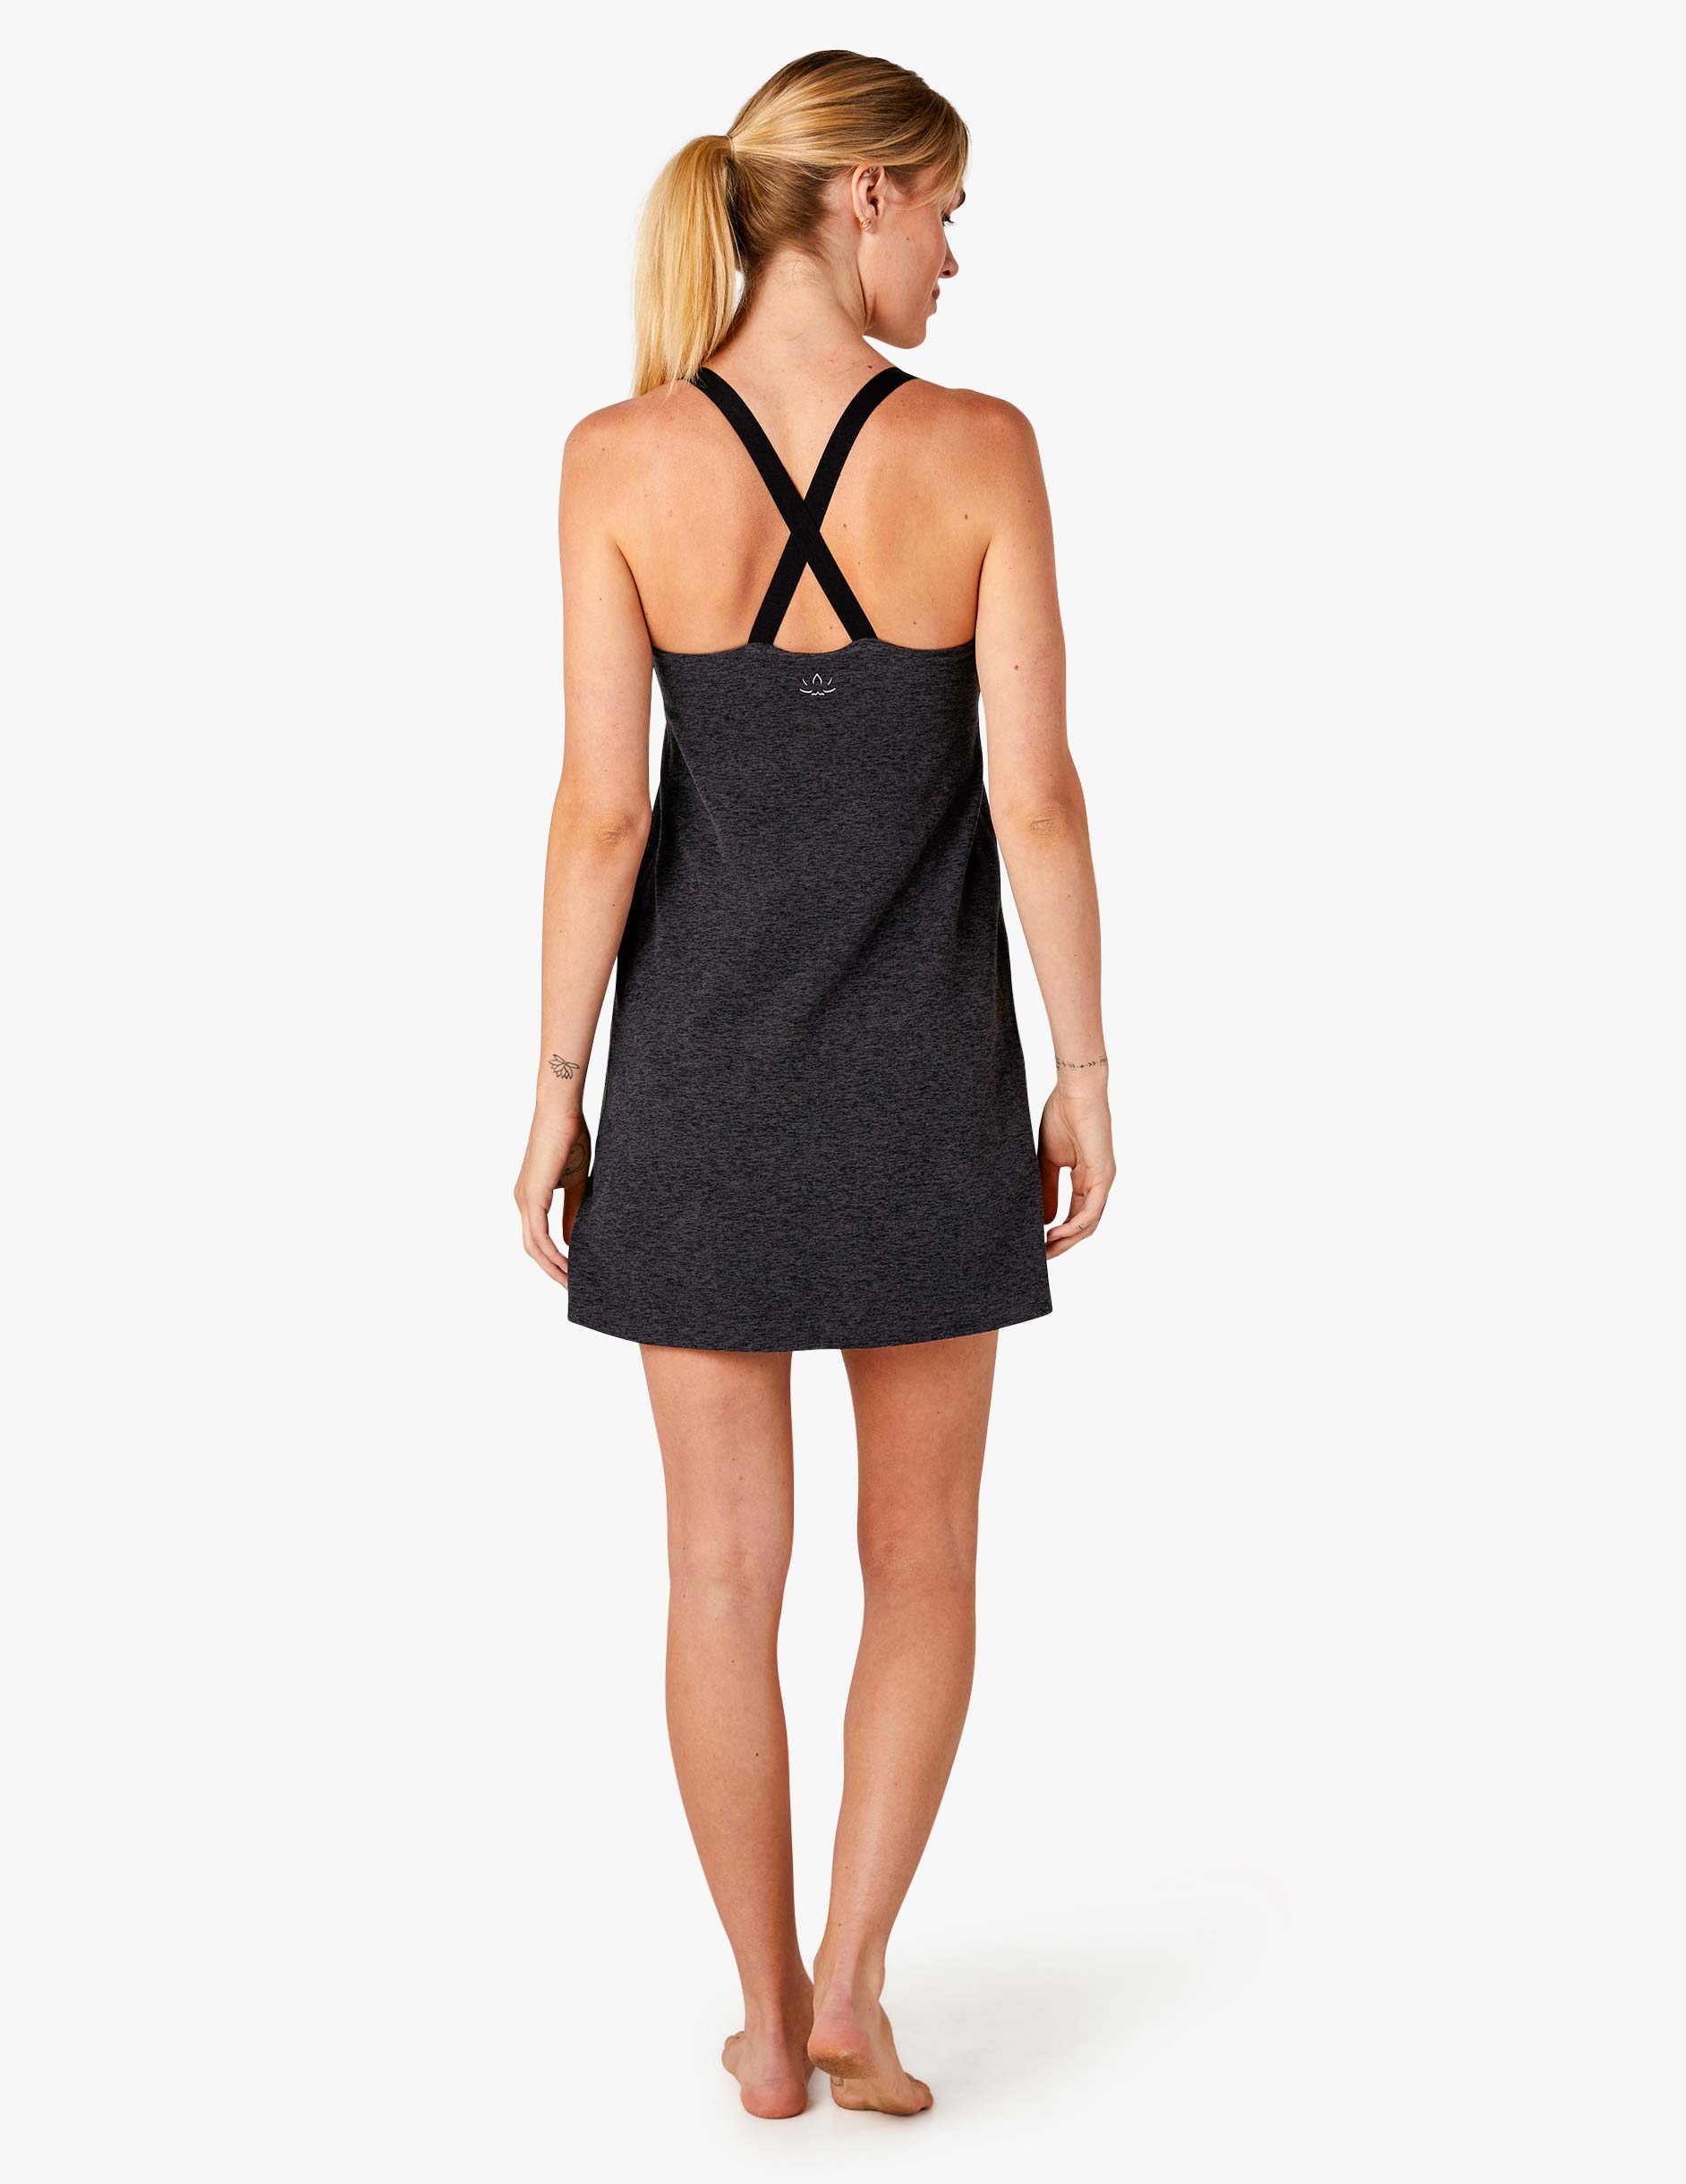 dark gray sleeveless  short slim fitting dress with cross straps and built in compression shorts